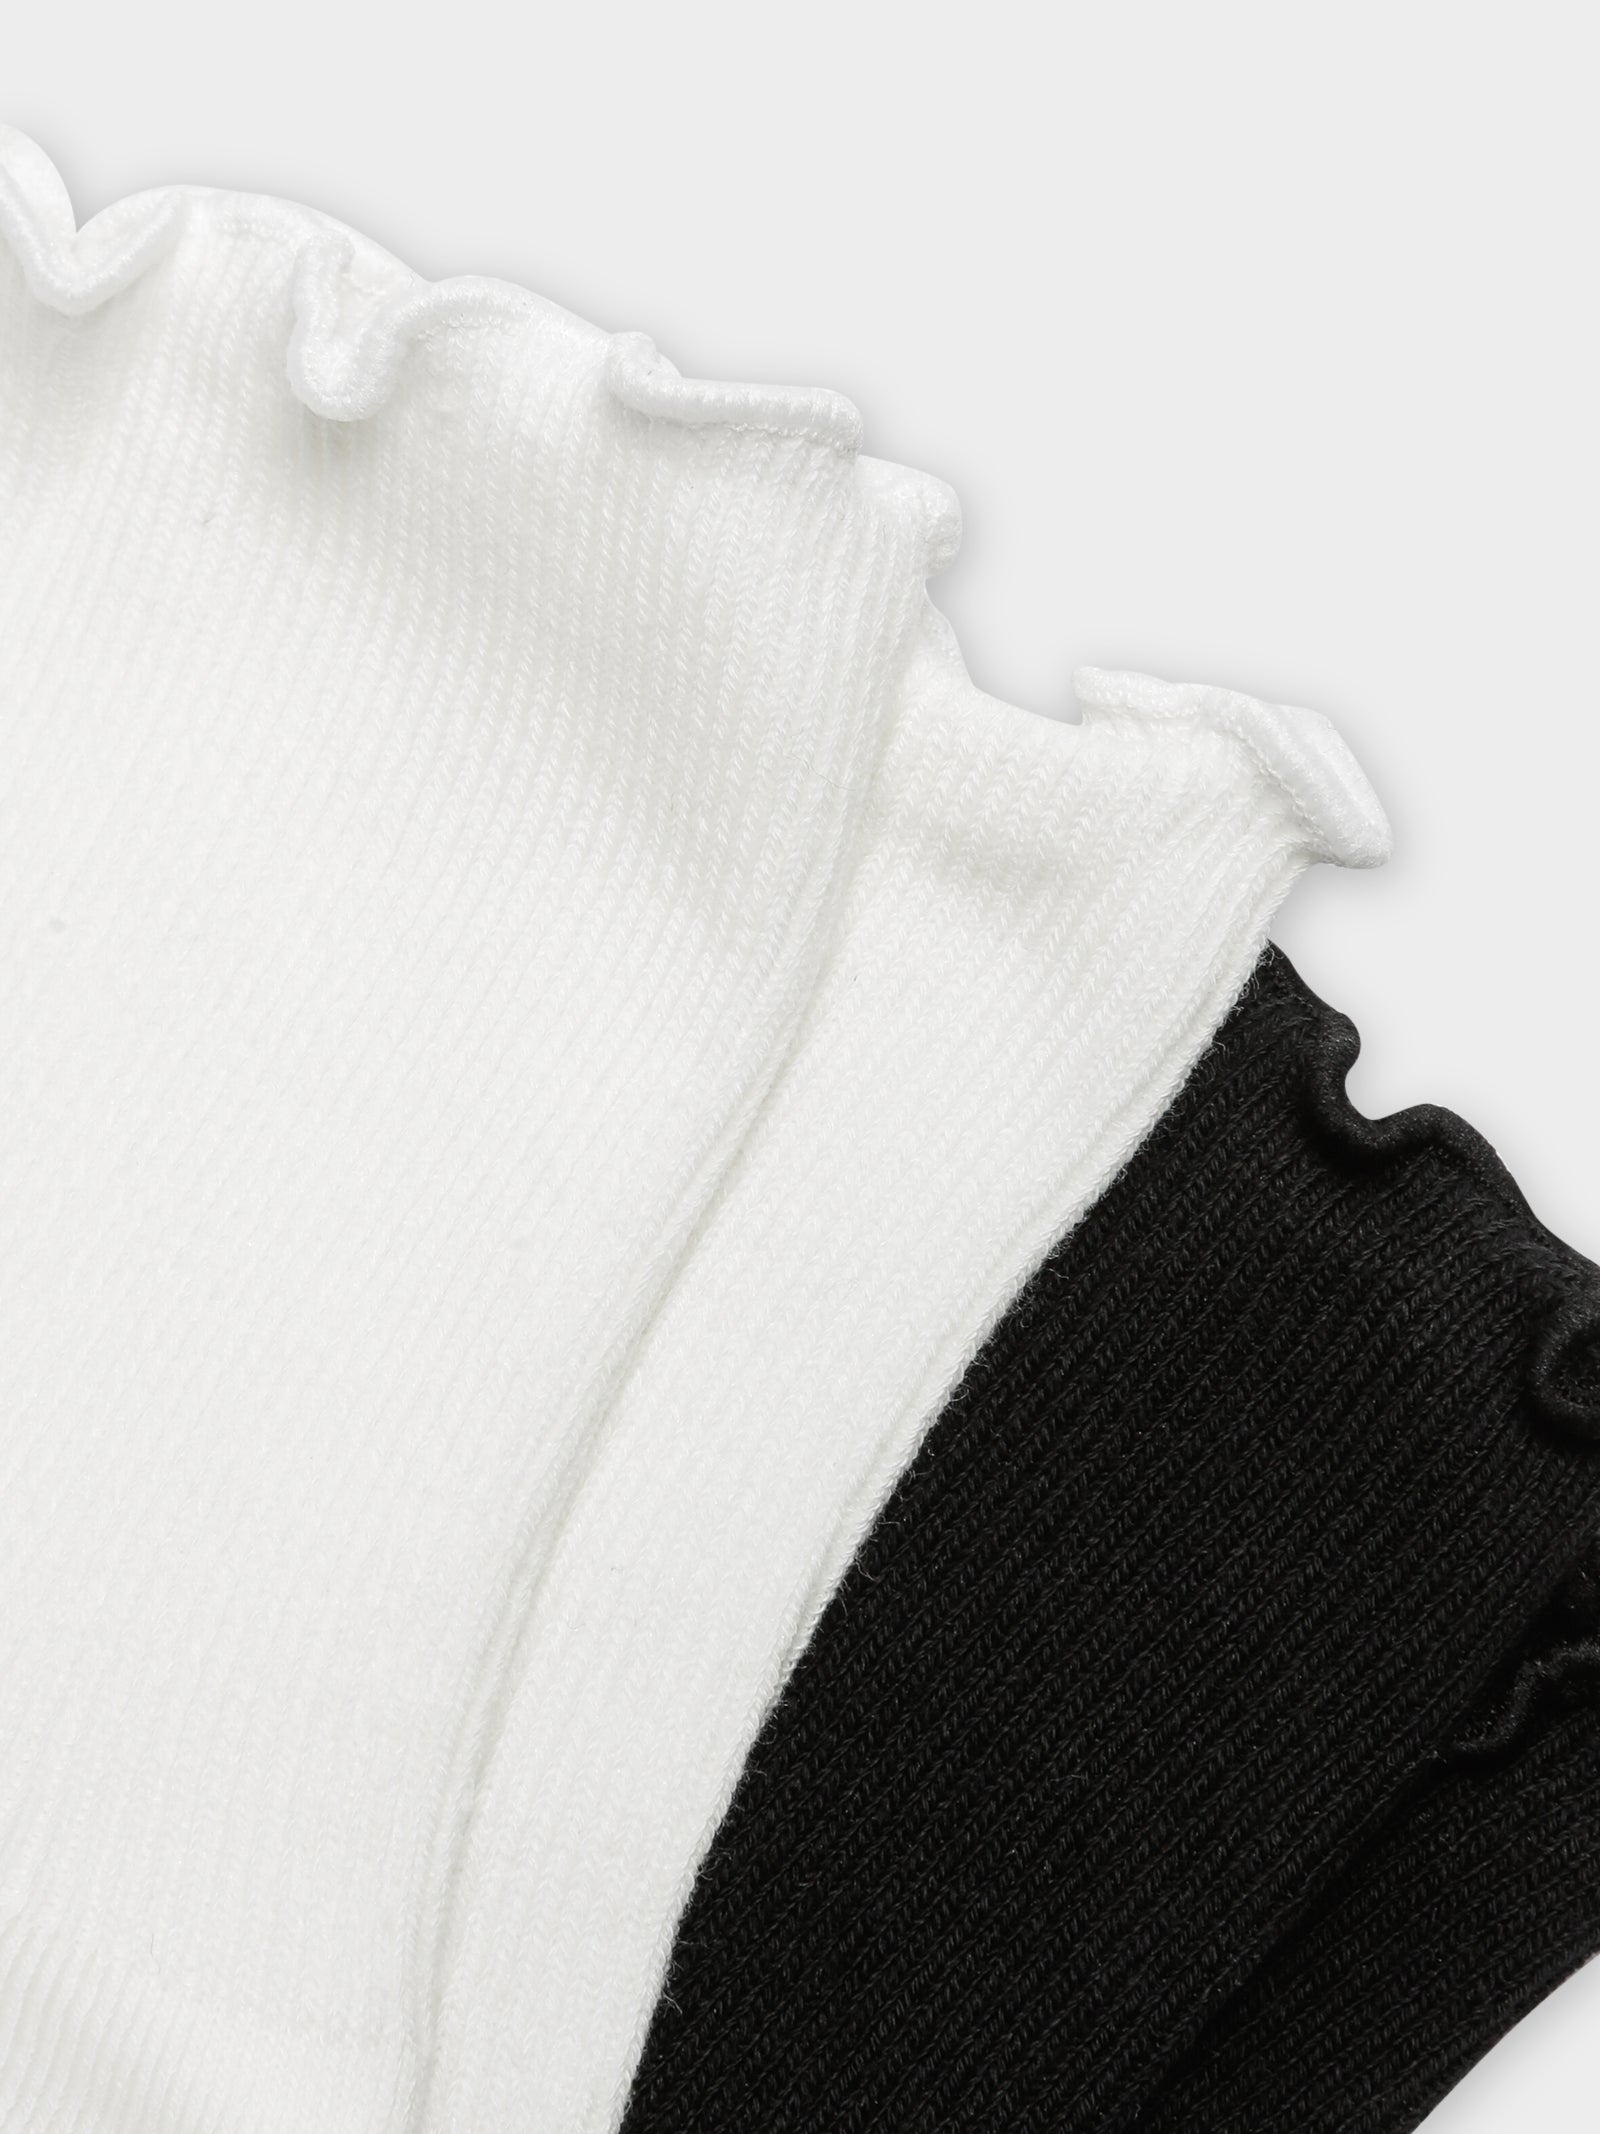 2 Pairs of Ruffle Ankle Socks in Black & White